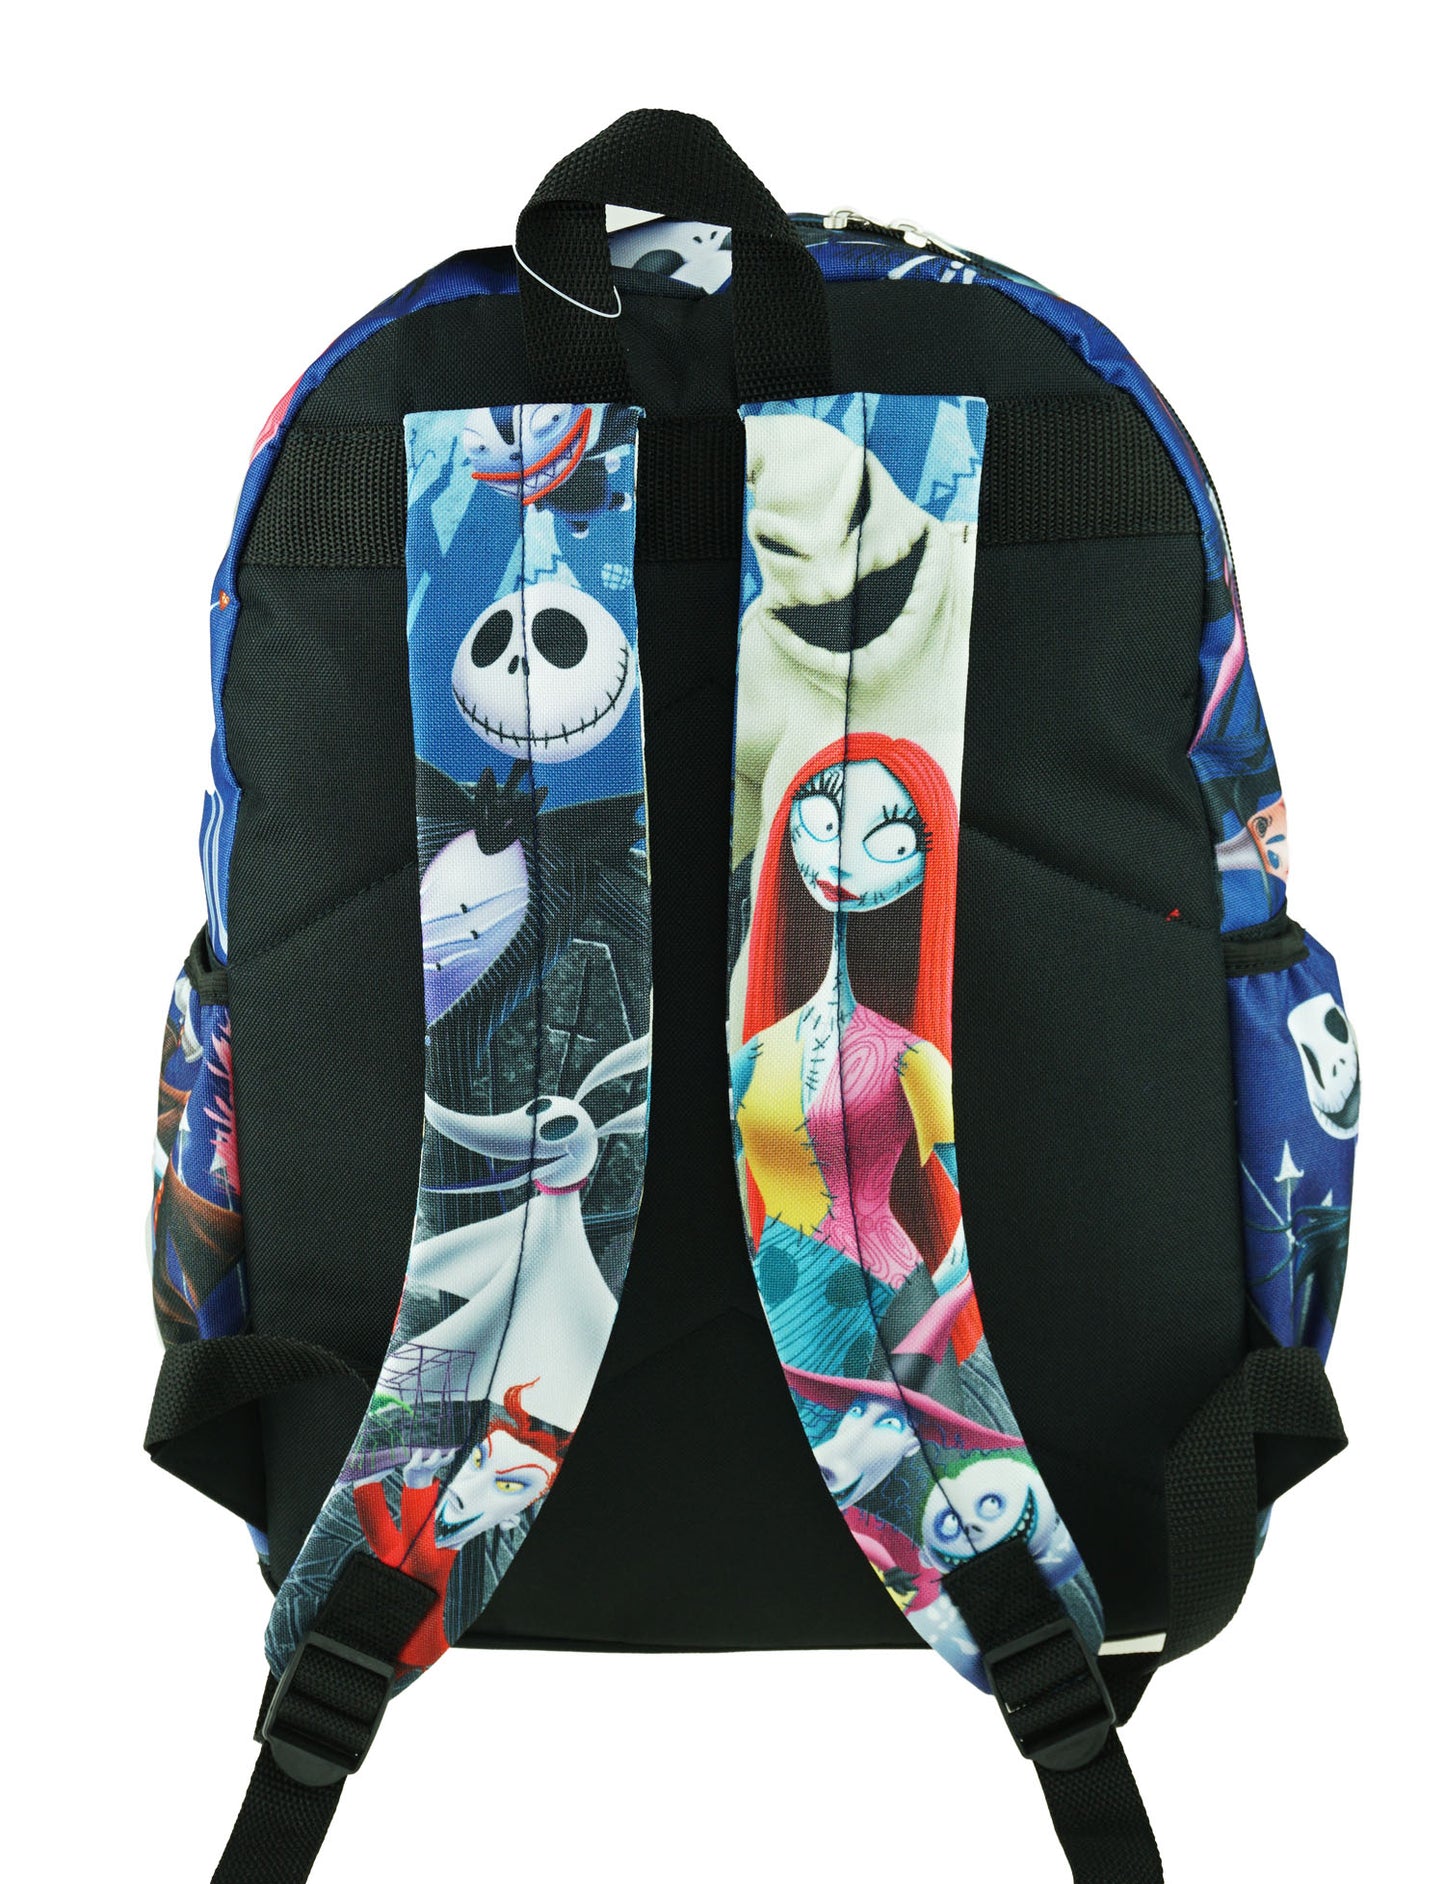 Nightmare Before Christmas - Deluxe Oversize Print 16" Backpack w/Laptop Compartment - A19607